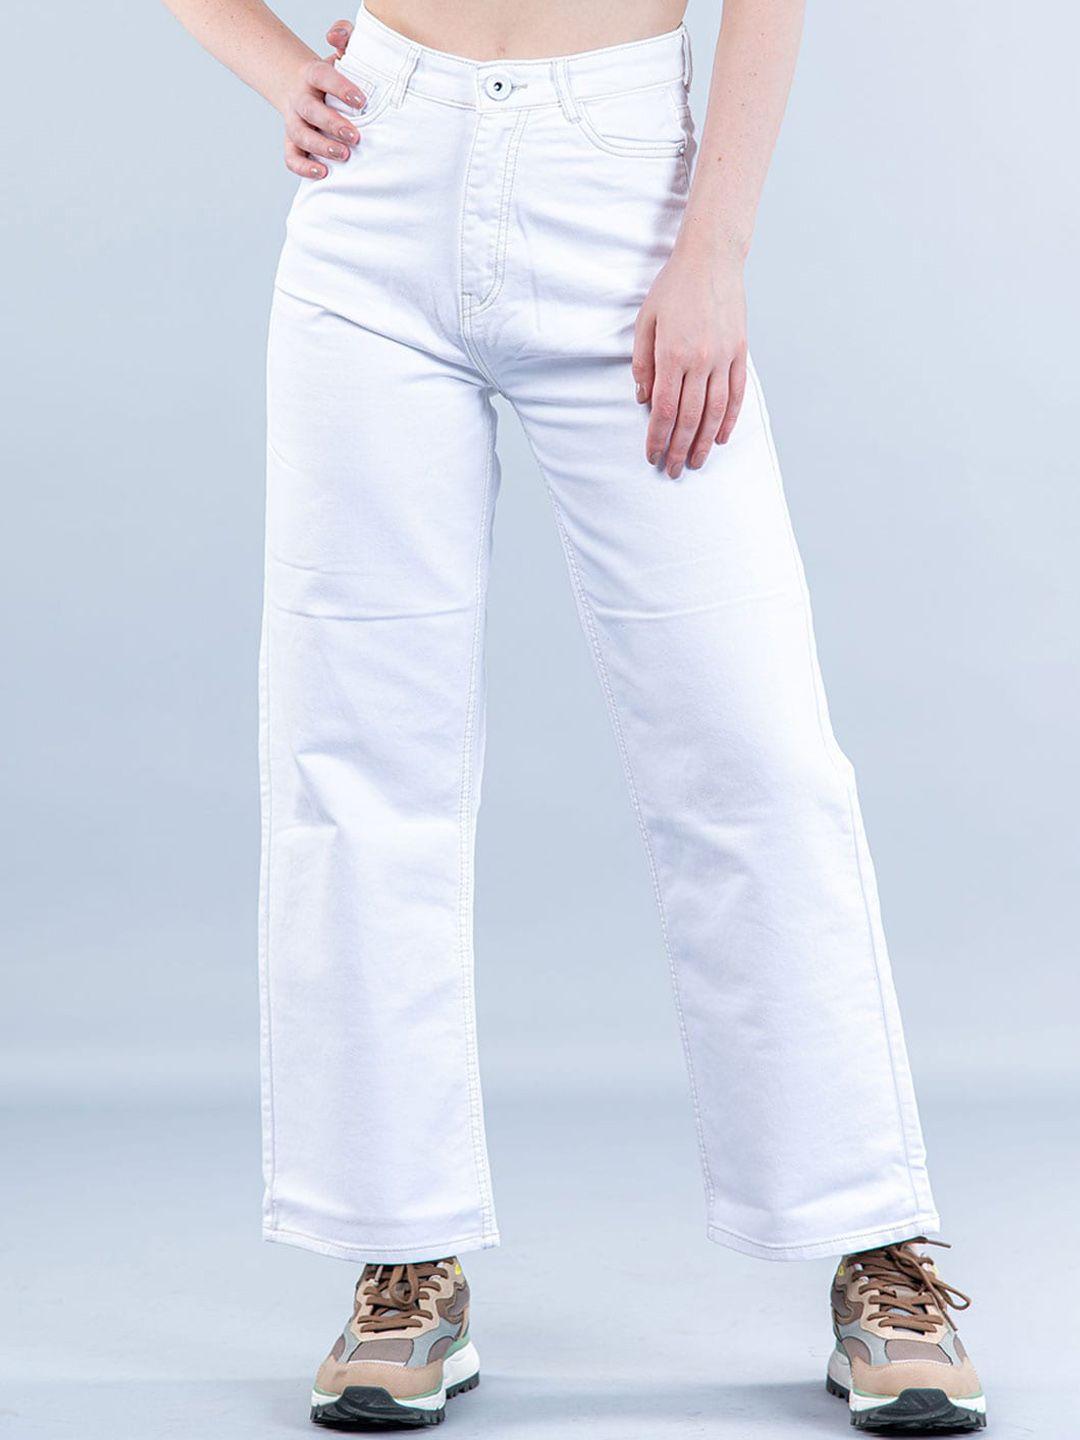 tistabene-women-comfort-flared-fit-stretchable-clean-look-jeans